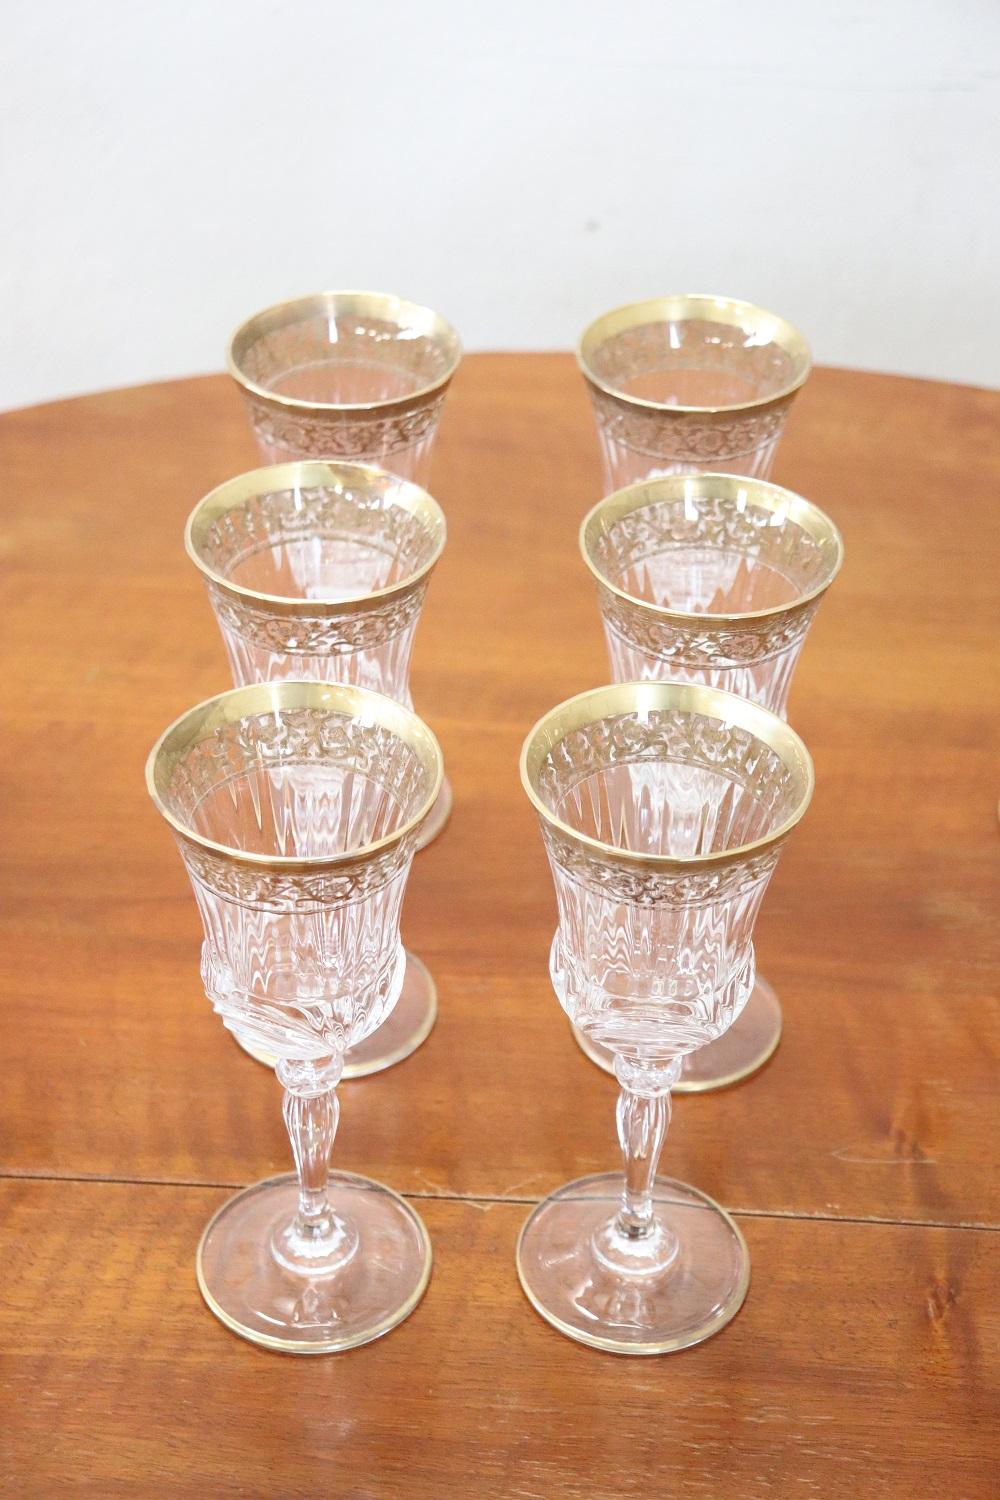 Italian Luxury Crystals Glasses Set with Gold Decoration 24 Glasses and 1 Water Jug